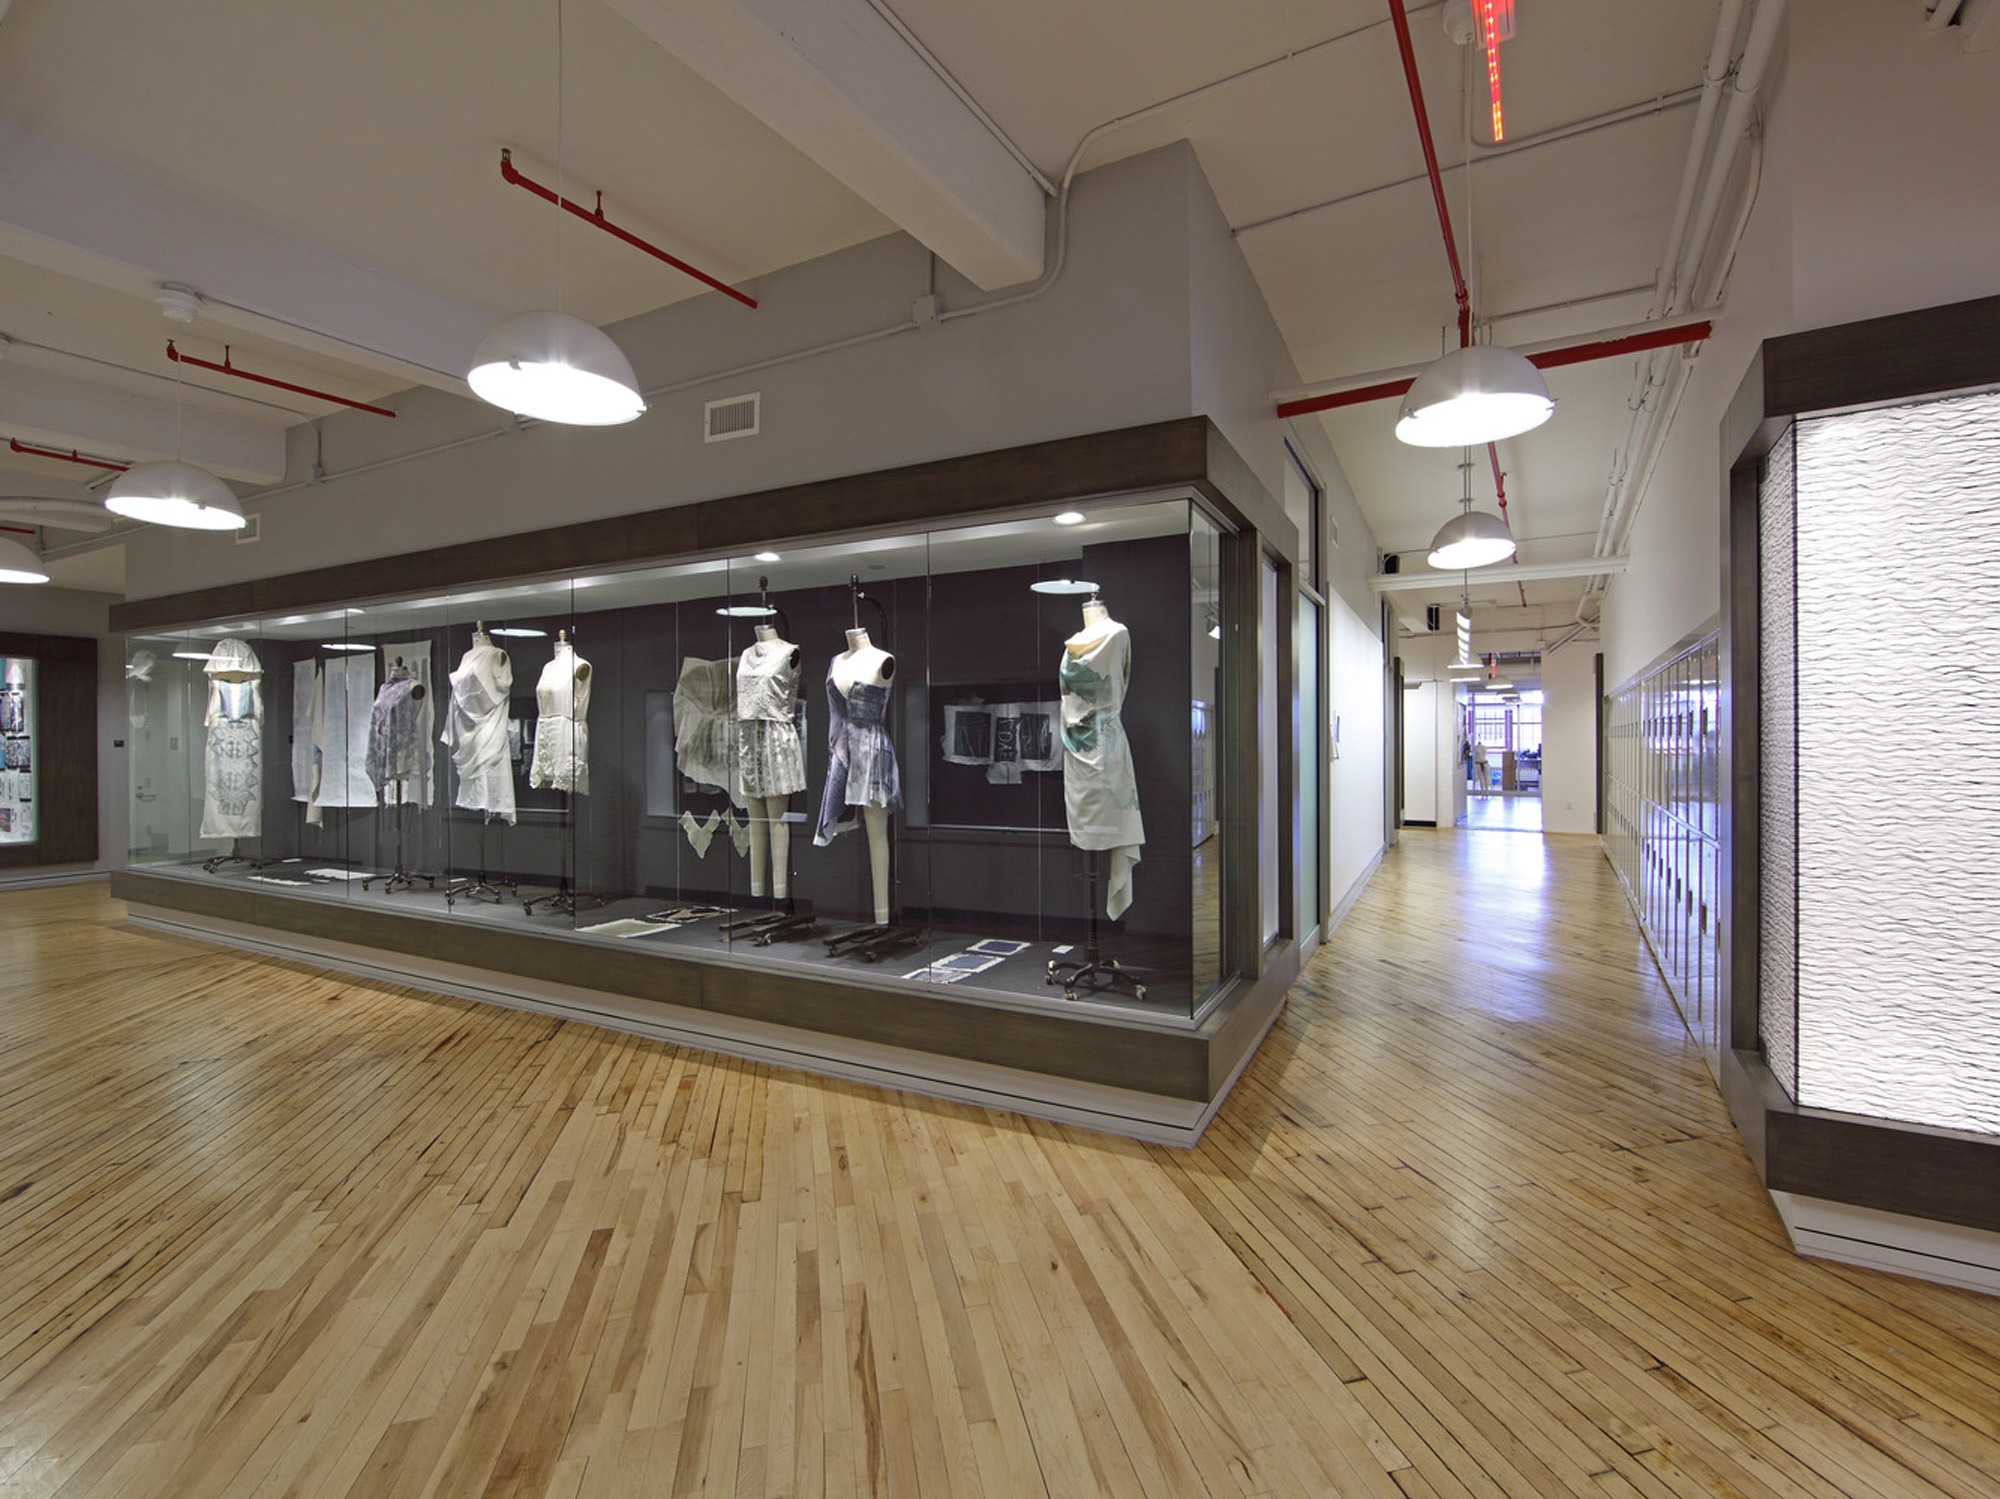 Modern gallery space featuring a display case with historic clothing, polished wooden floors, white walls, and industrial ceiling with exposed red ductwork. LED track lighting accentuates the exhibit, blending function with contemporary design.